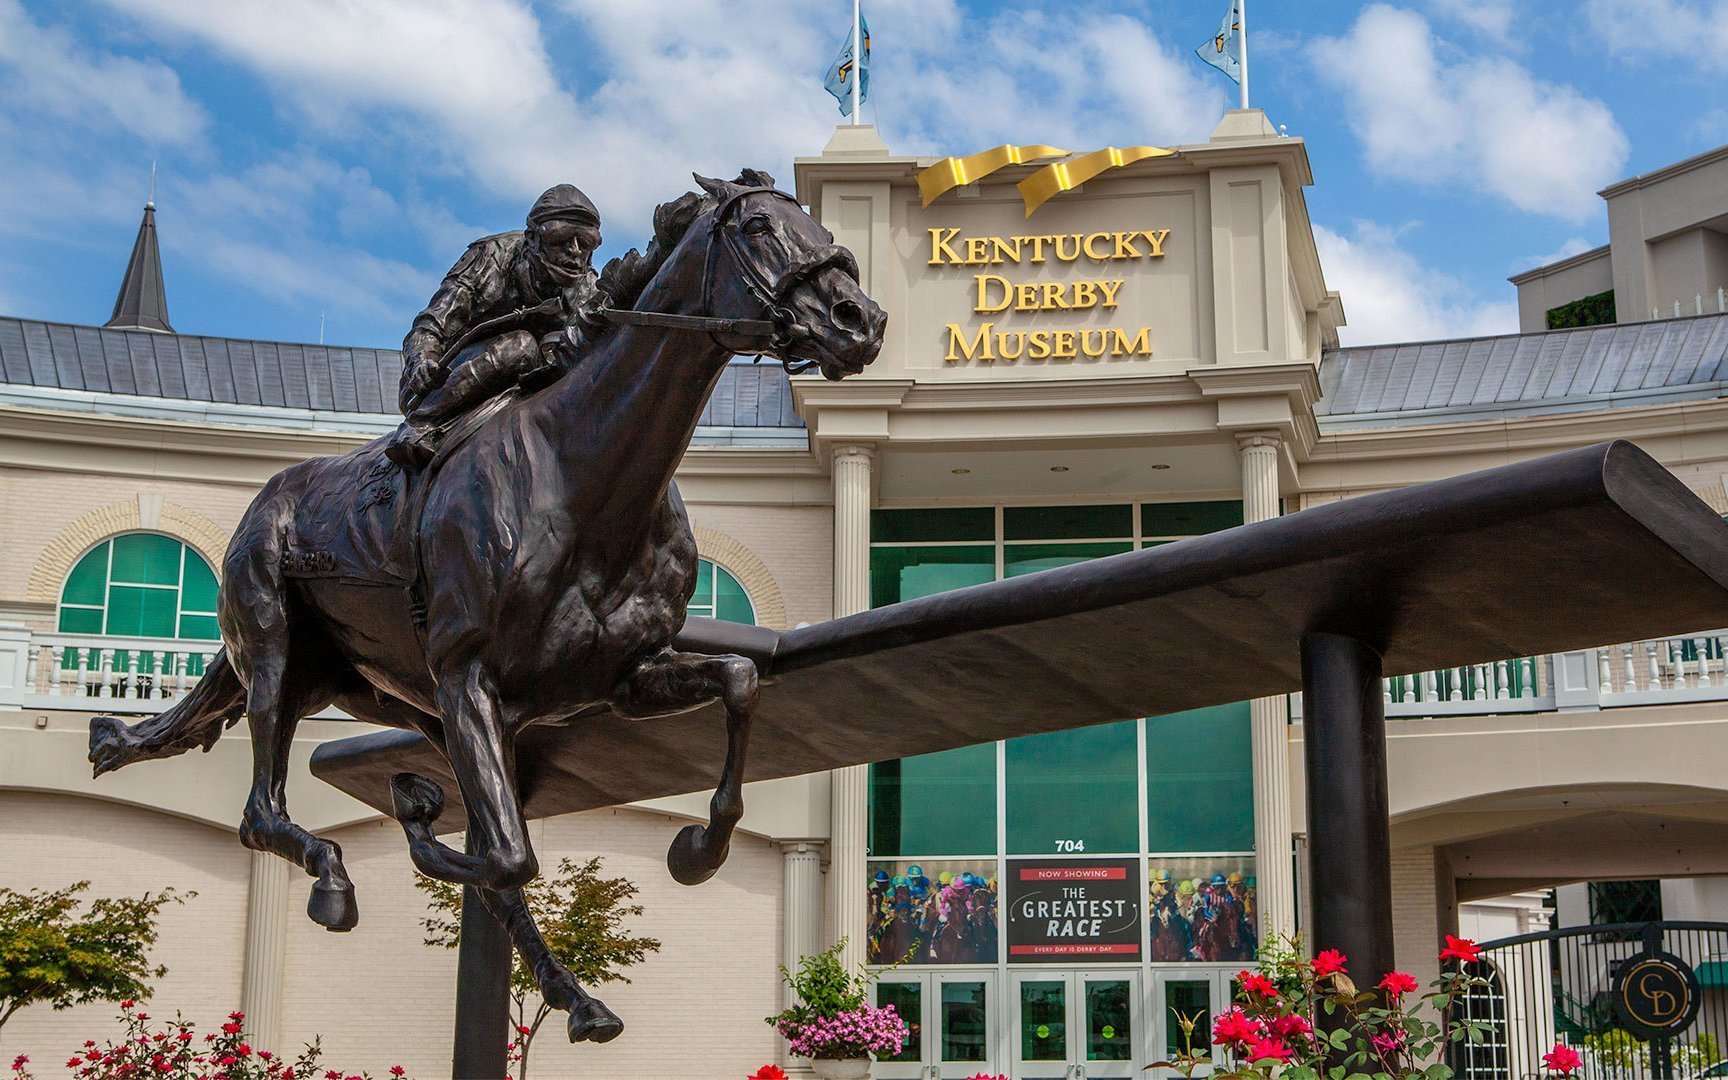 Kentucky Derby Museum donating over $10,000 to COVID-19 relief efforts